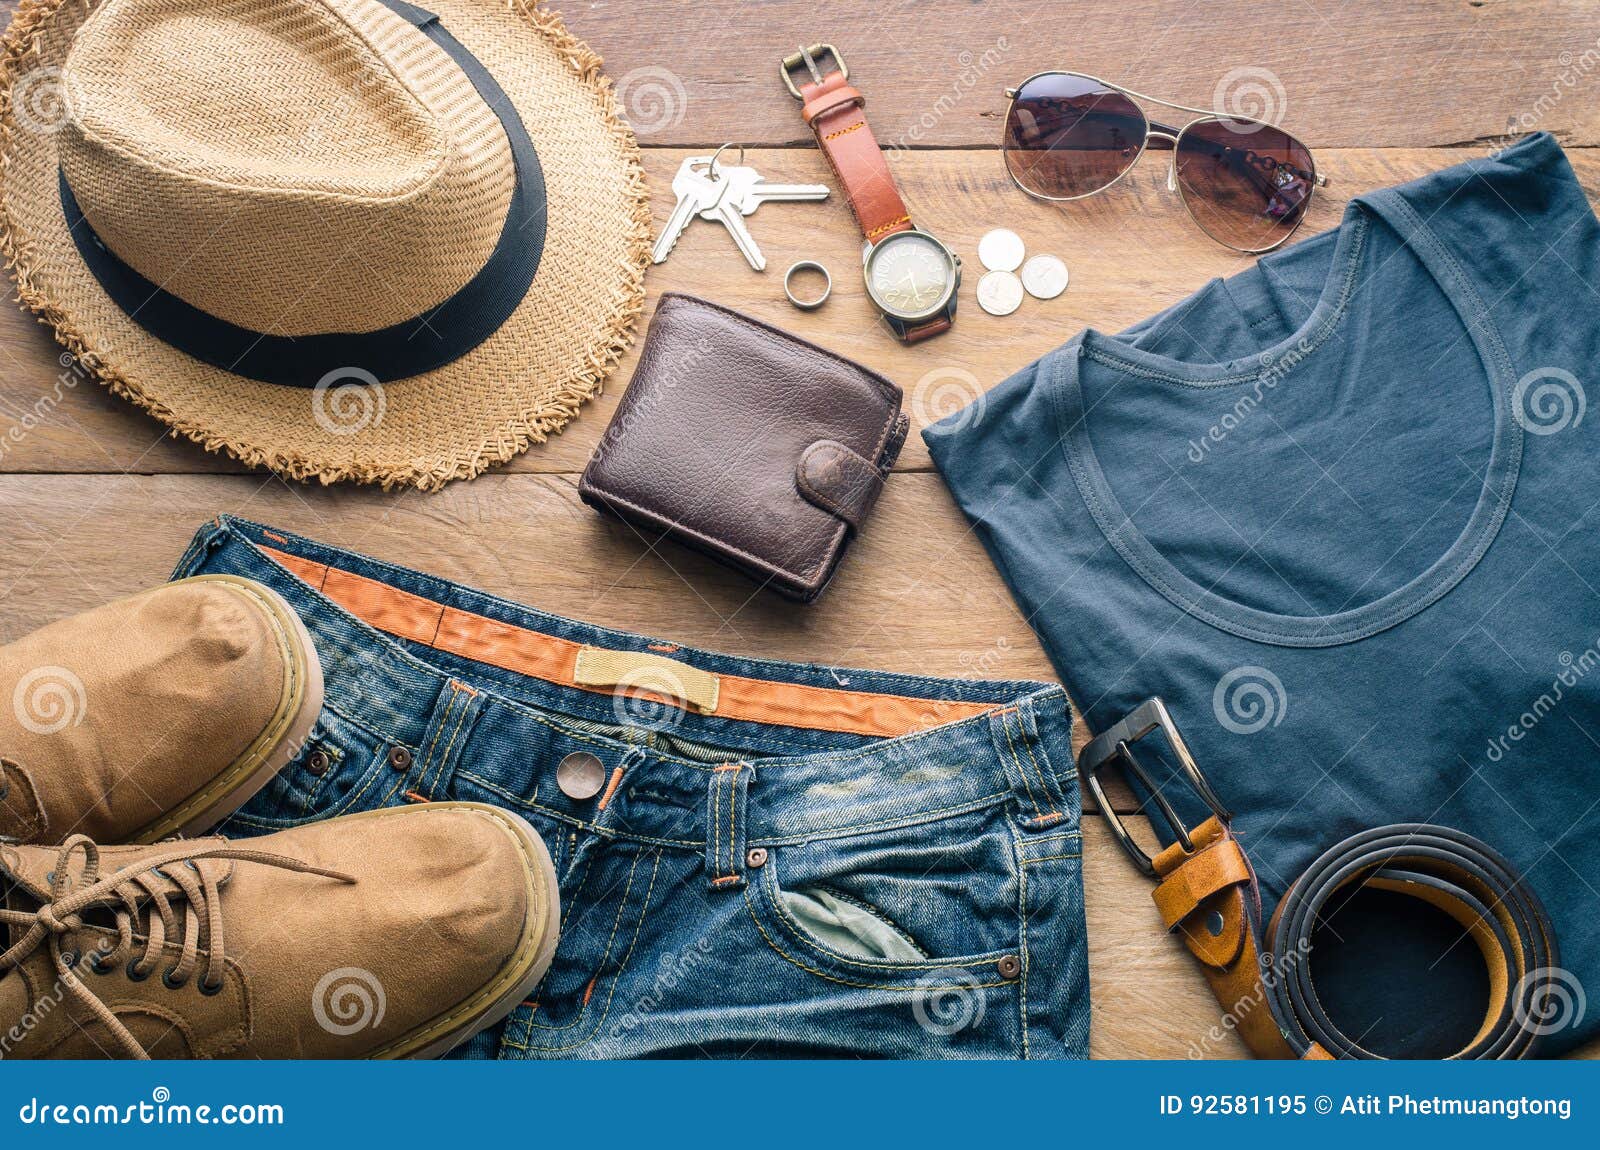 Accessories And Apparel For Travel On A Wooden Floor Stock Image ...